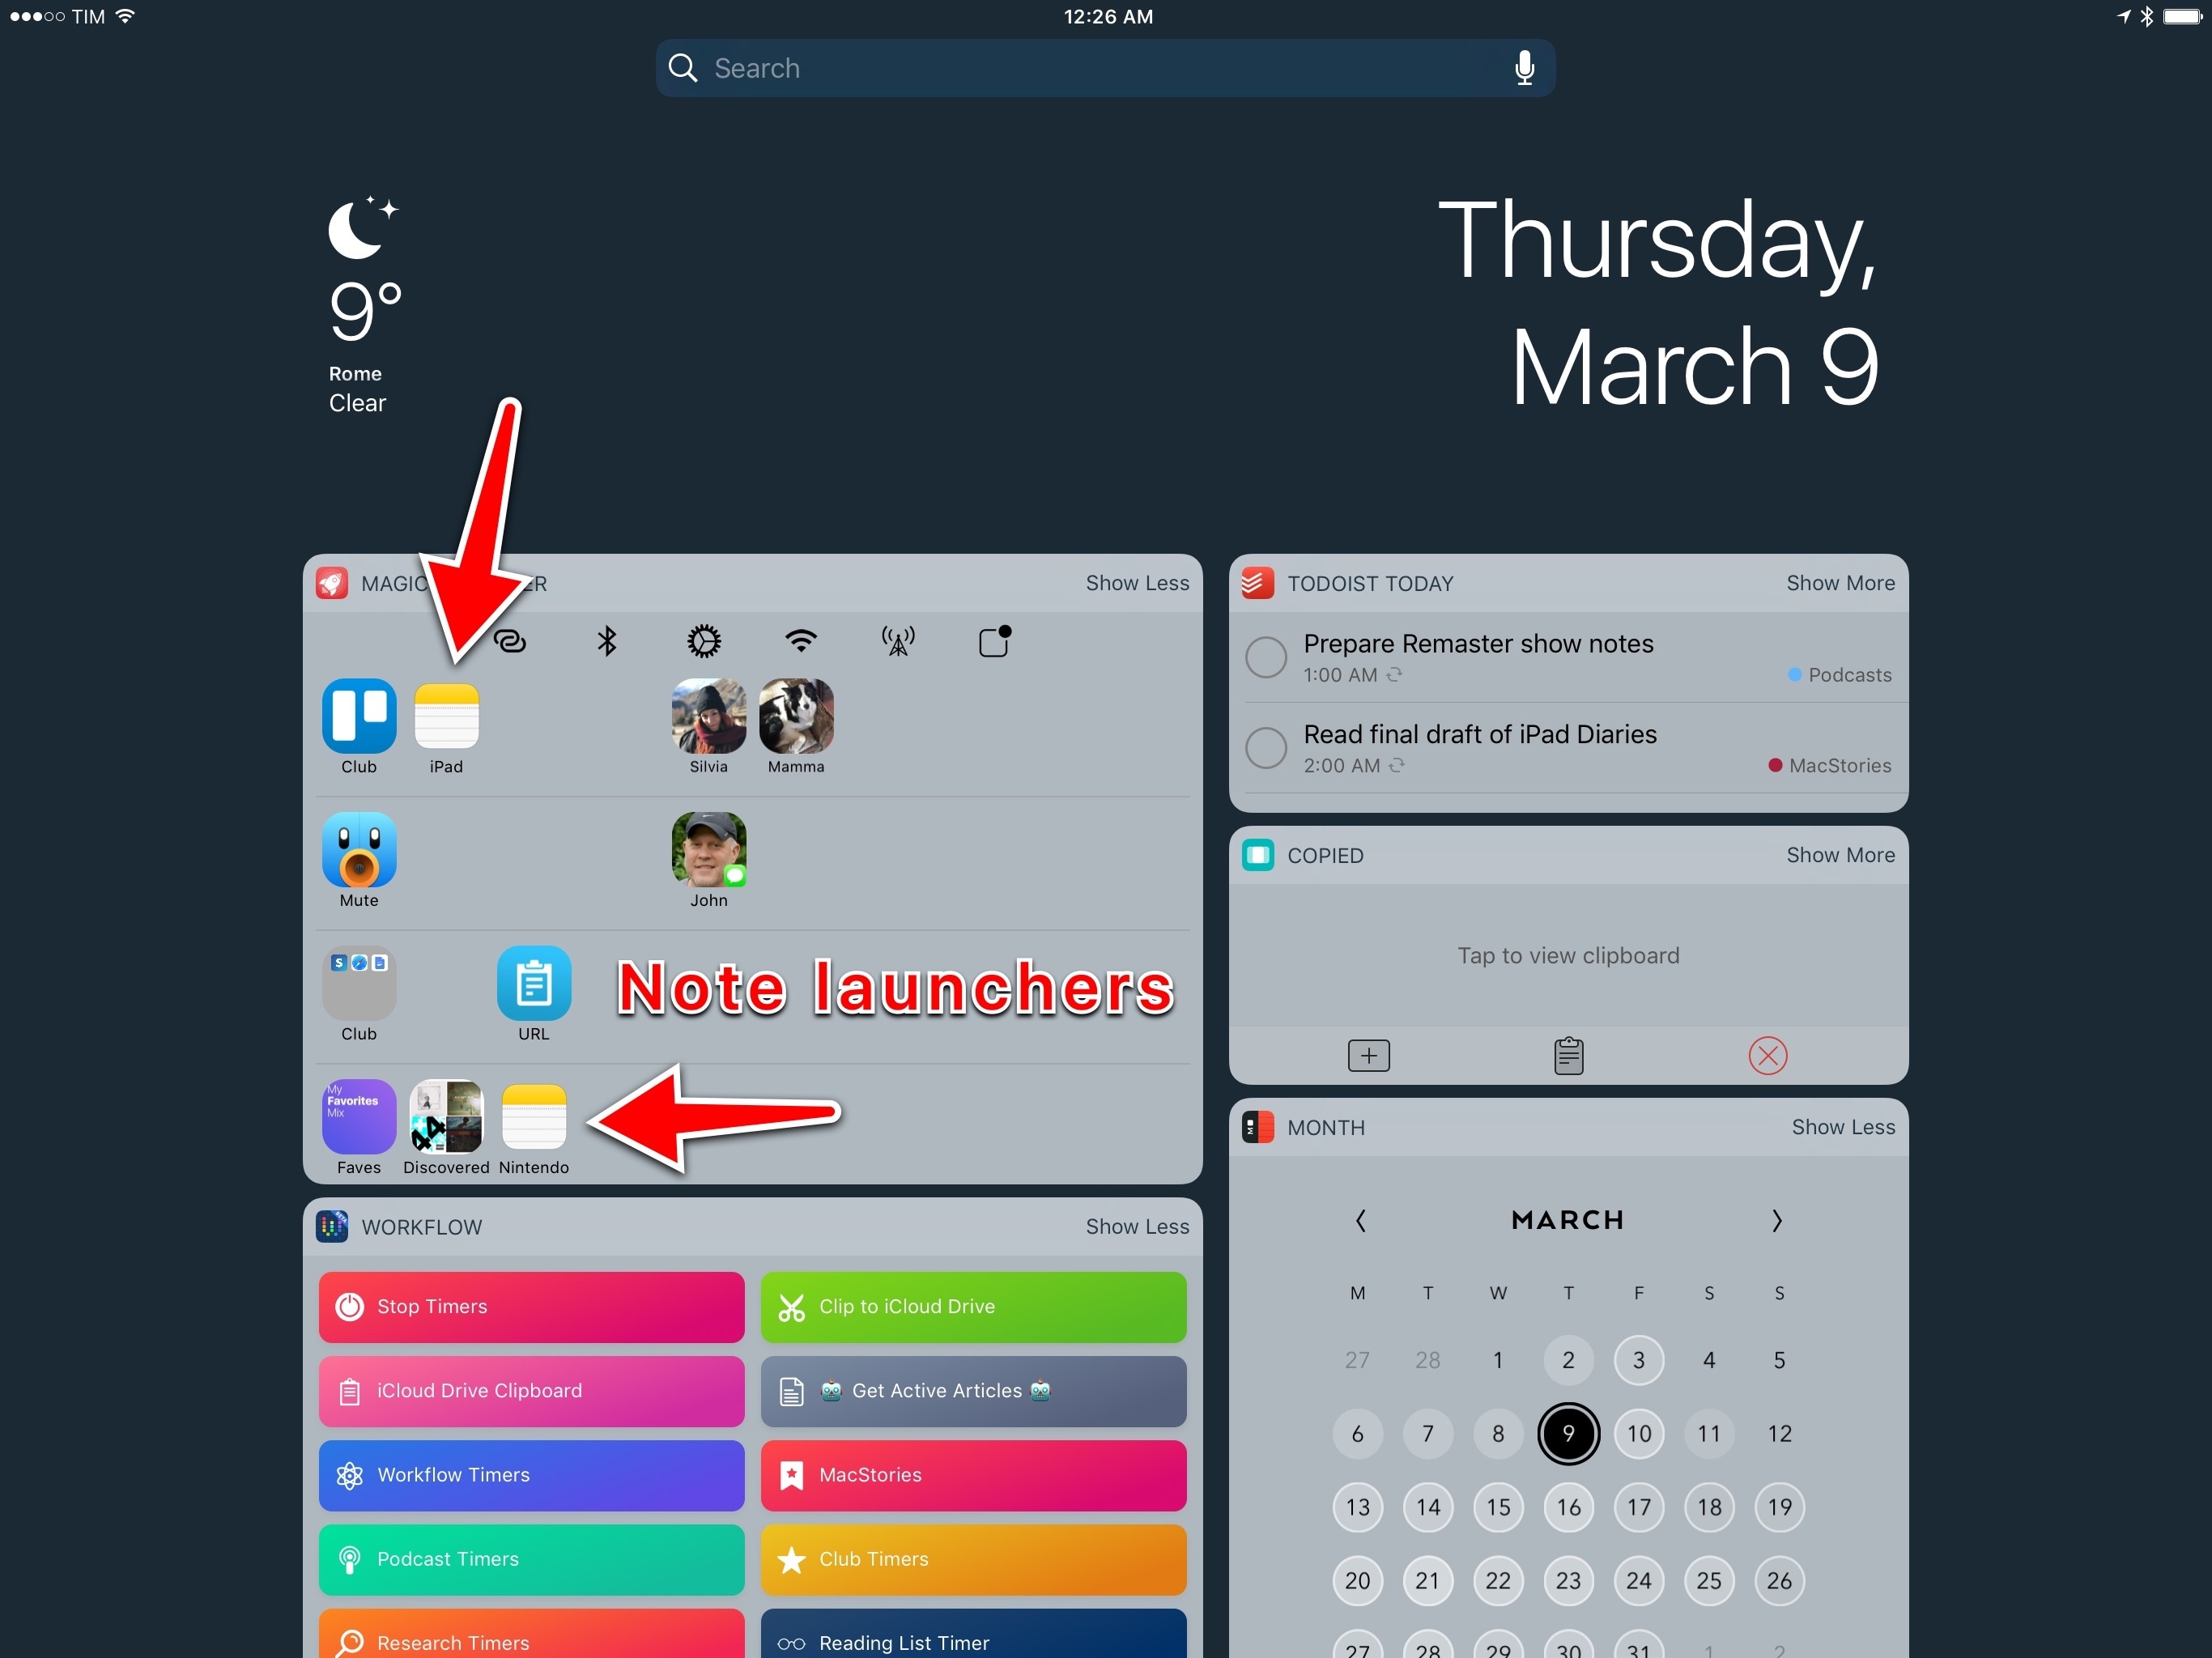 I can launch specific notes with iCloud.com shareable URLs and Magic Launcher.